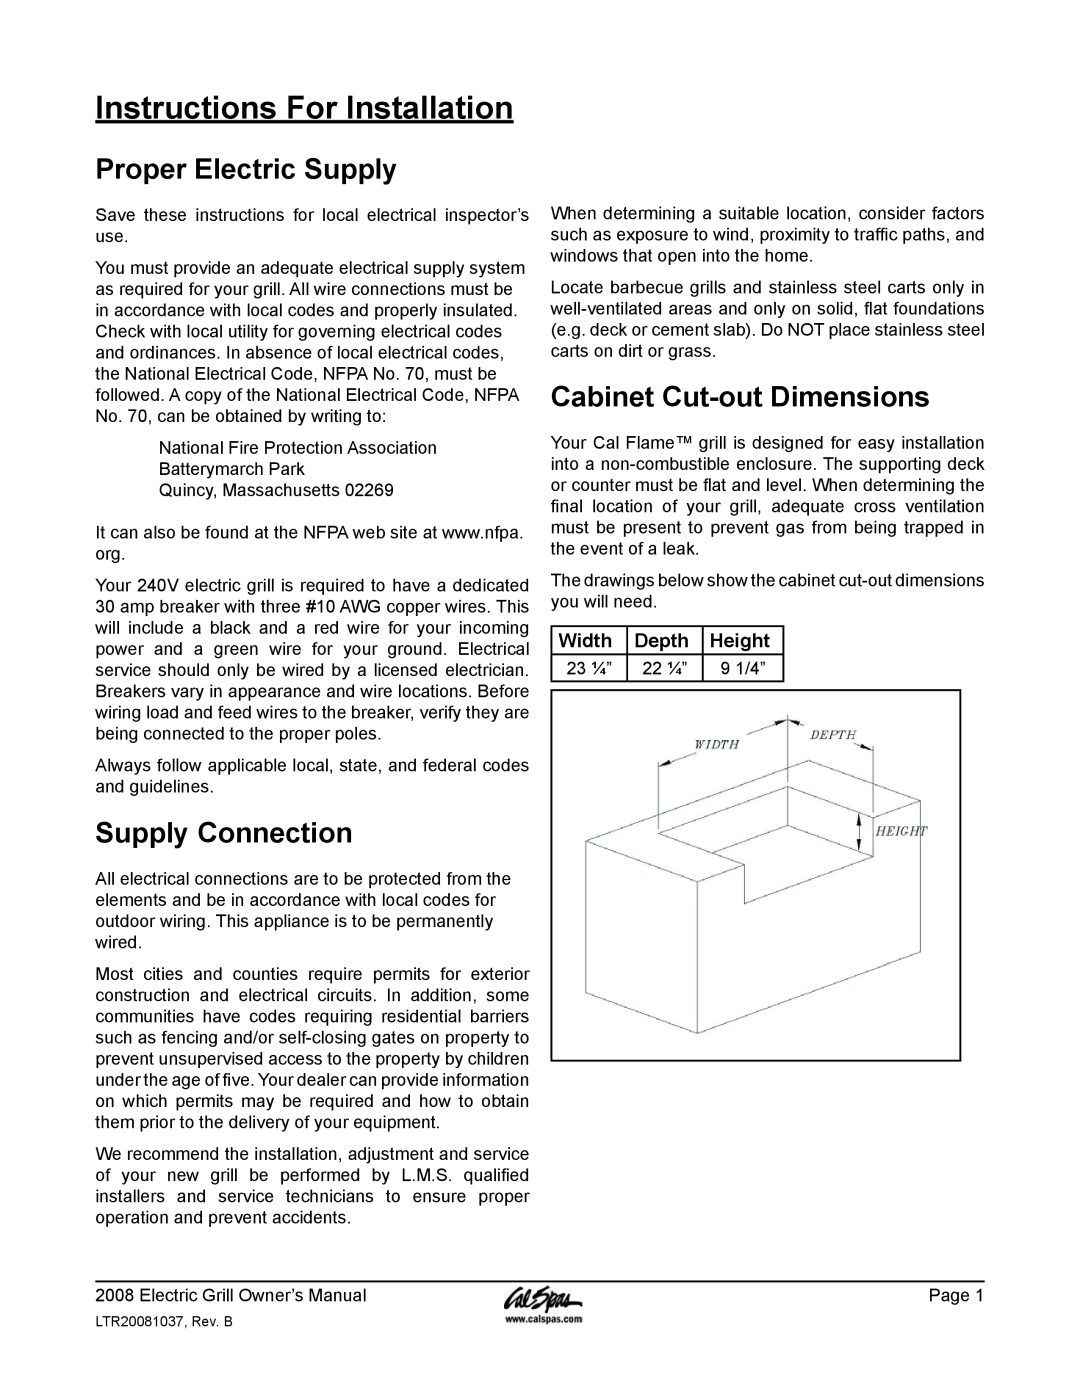 Cal Flame BBQCR07900E Instructions For Installation, Proper Electric Supply, Supply Connection, Cabinet Cut-outDimensions 